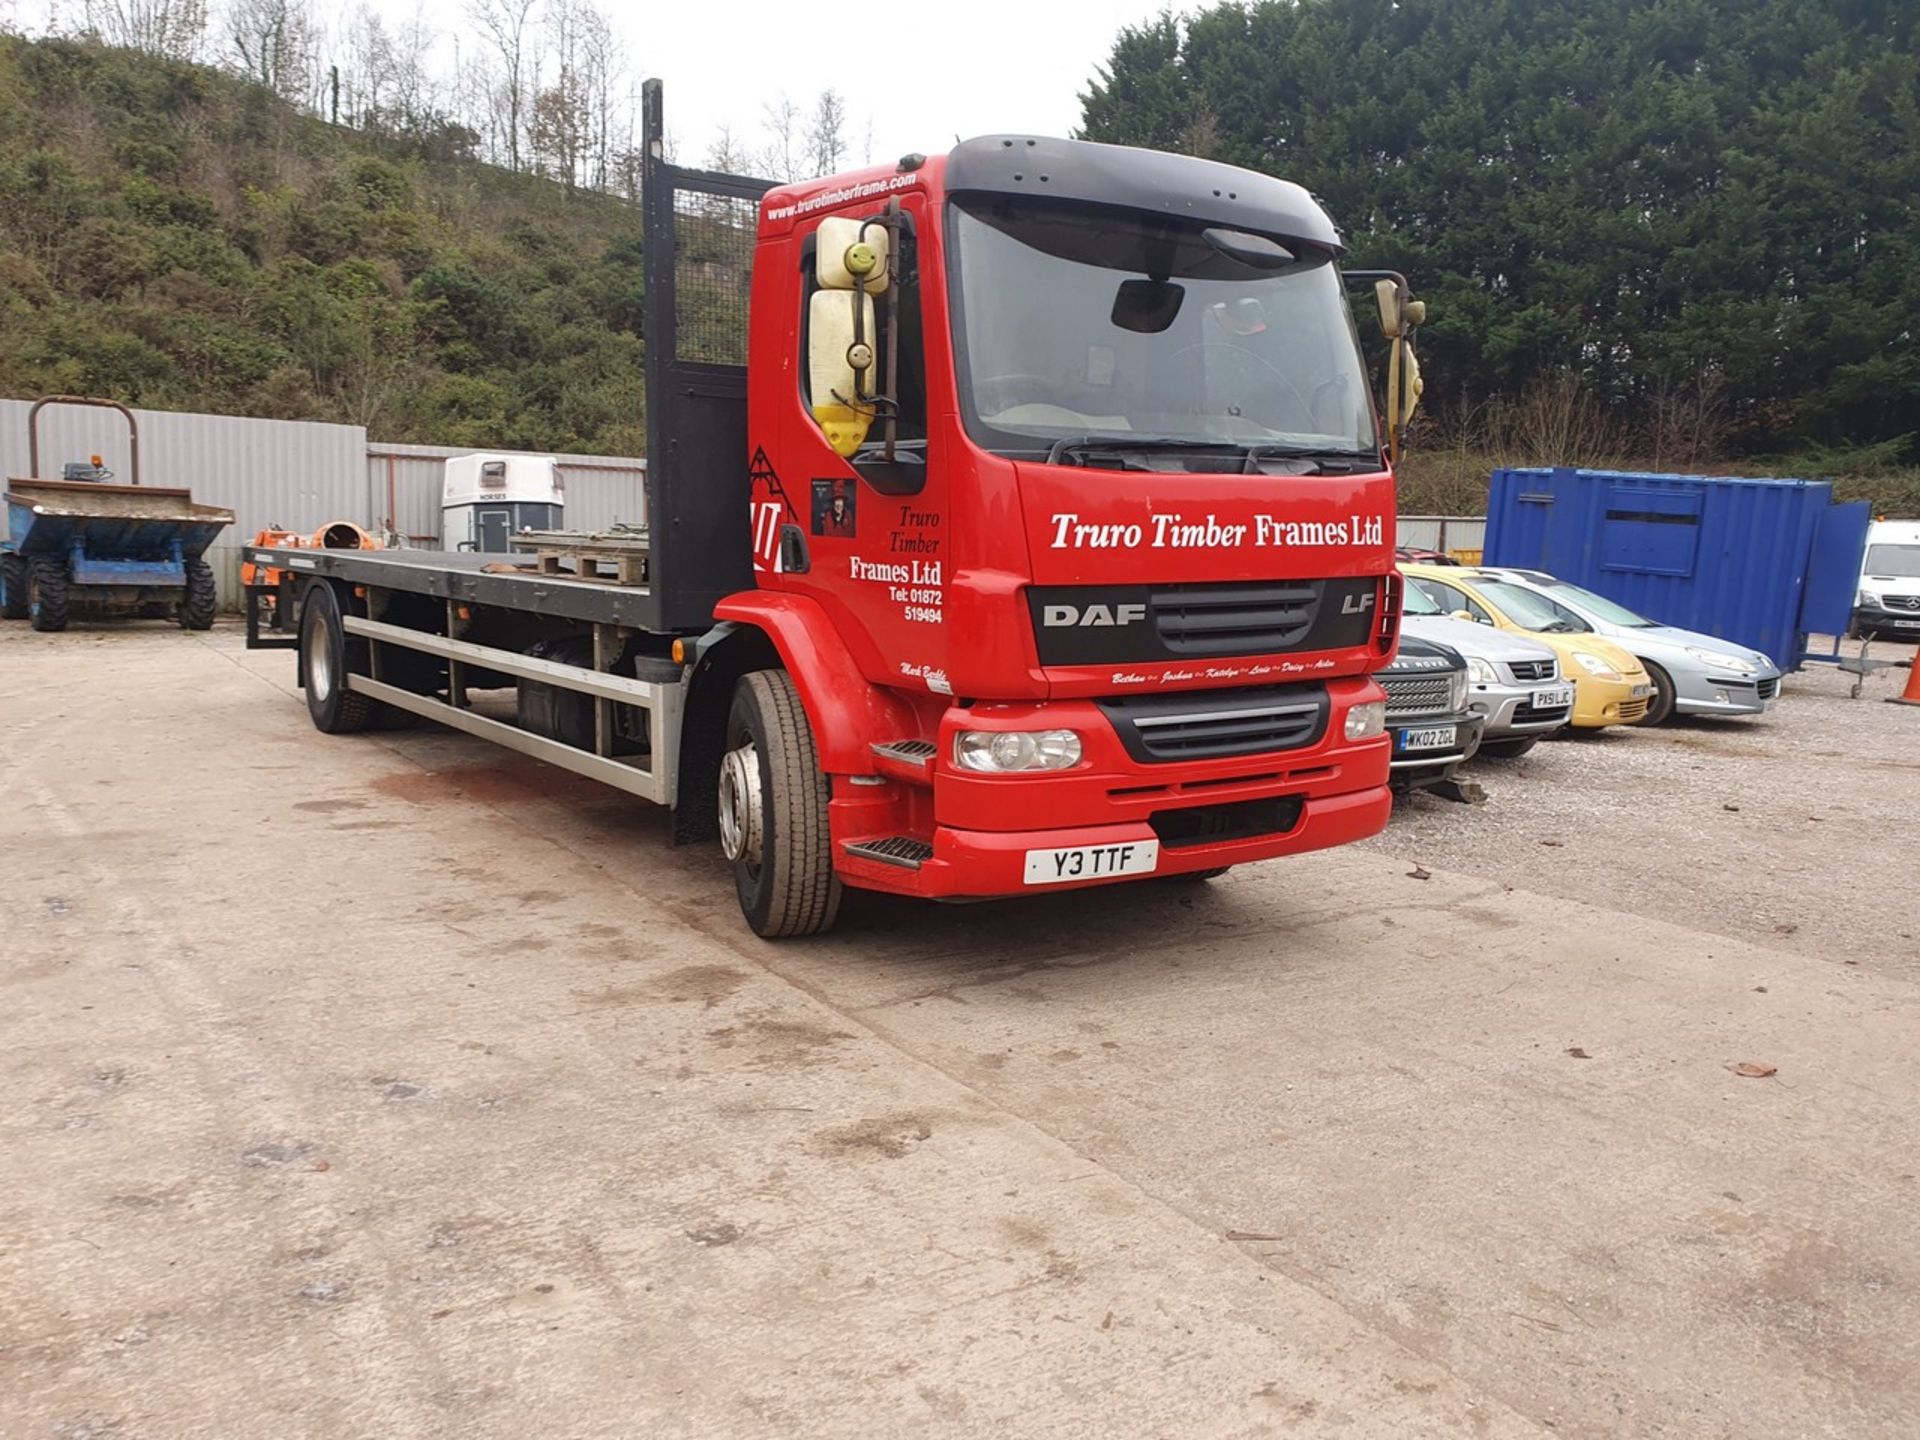 13/13 DAF TRUCKS FLAT BED - 6693cc 2dr (Red) - Image 5 of 23